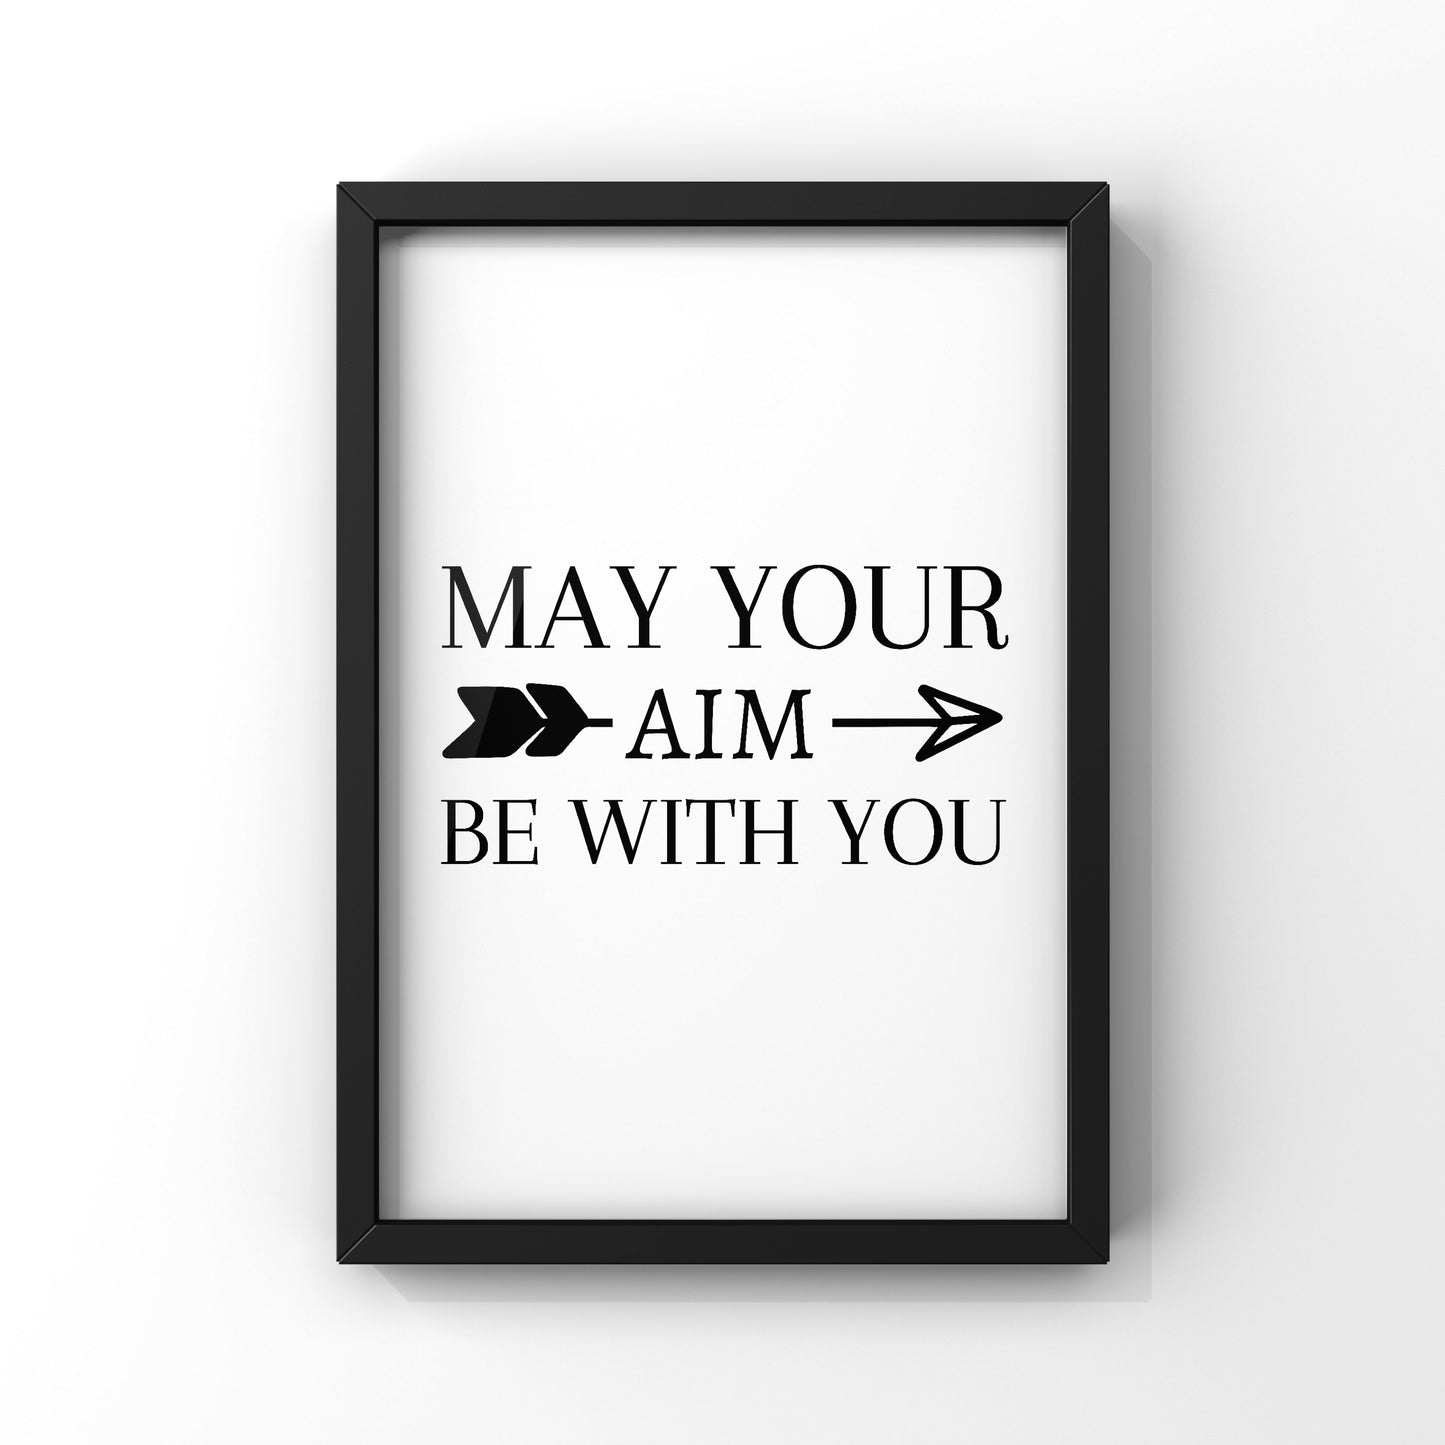 May your aim be with you